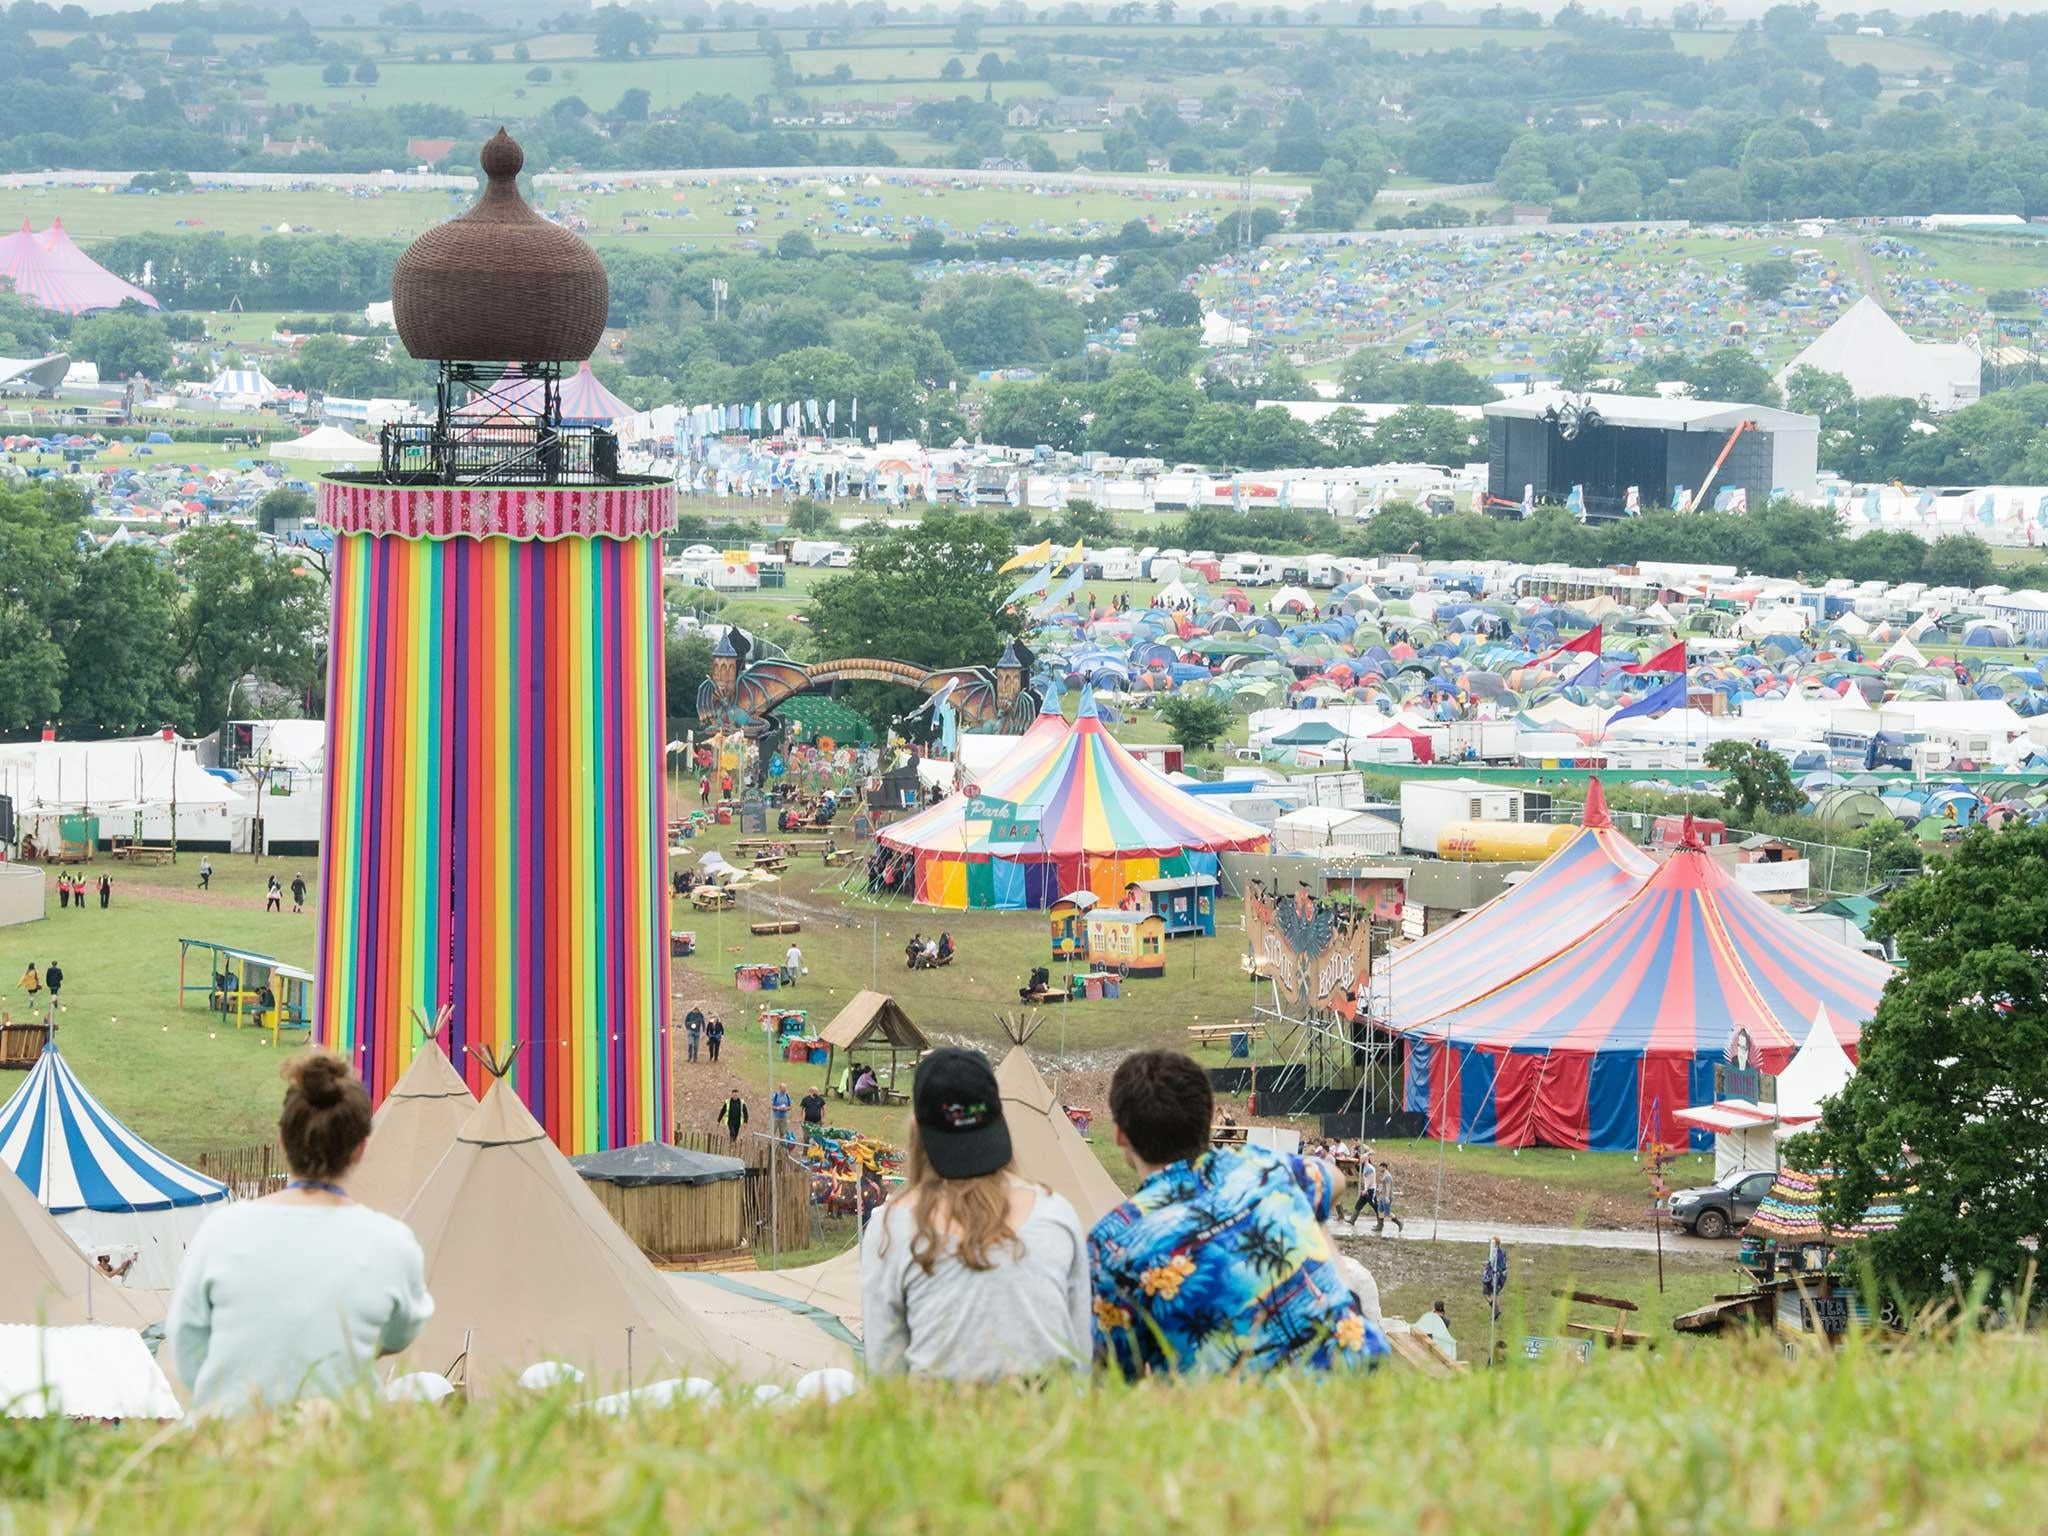 You can livestream six of Glastonbury's main stages on the BBC's Glastonbury website